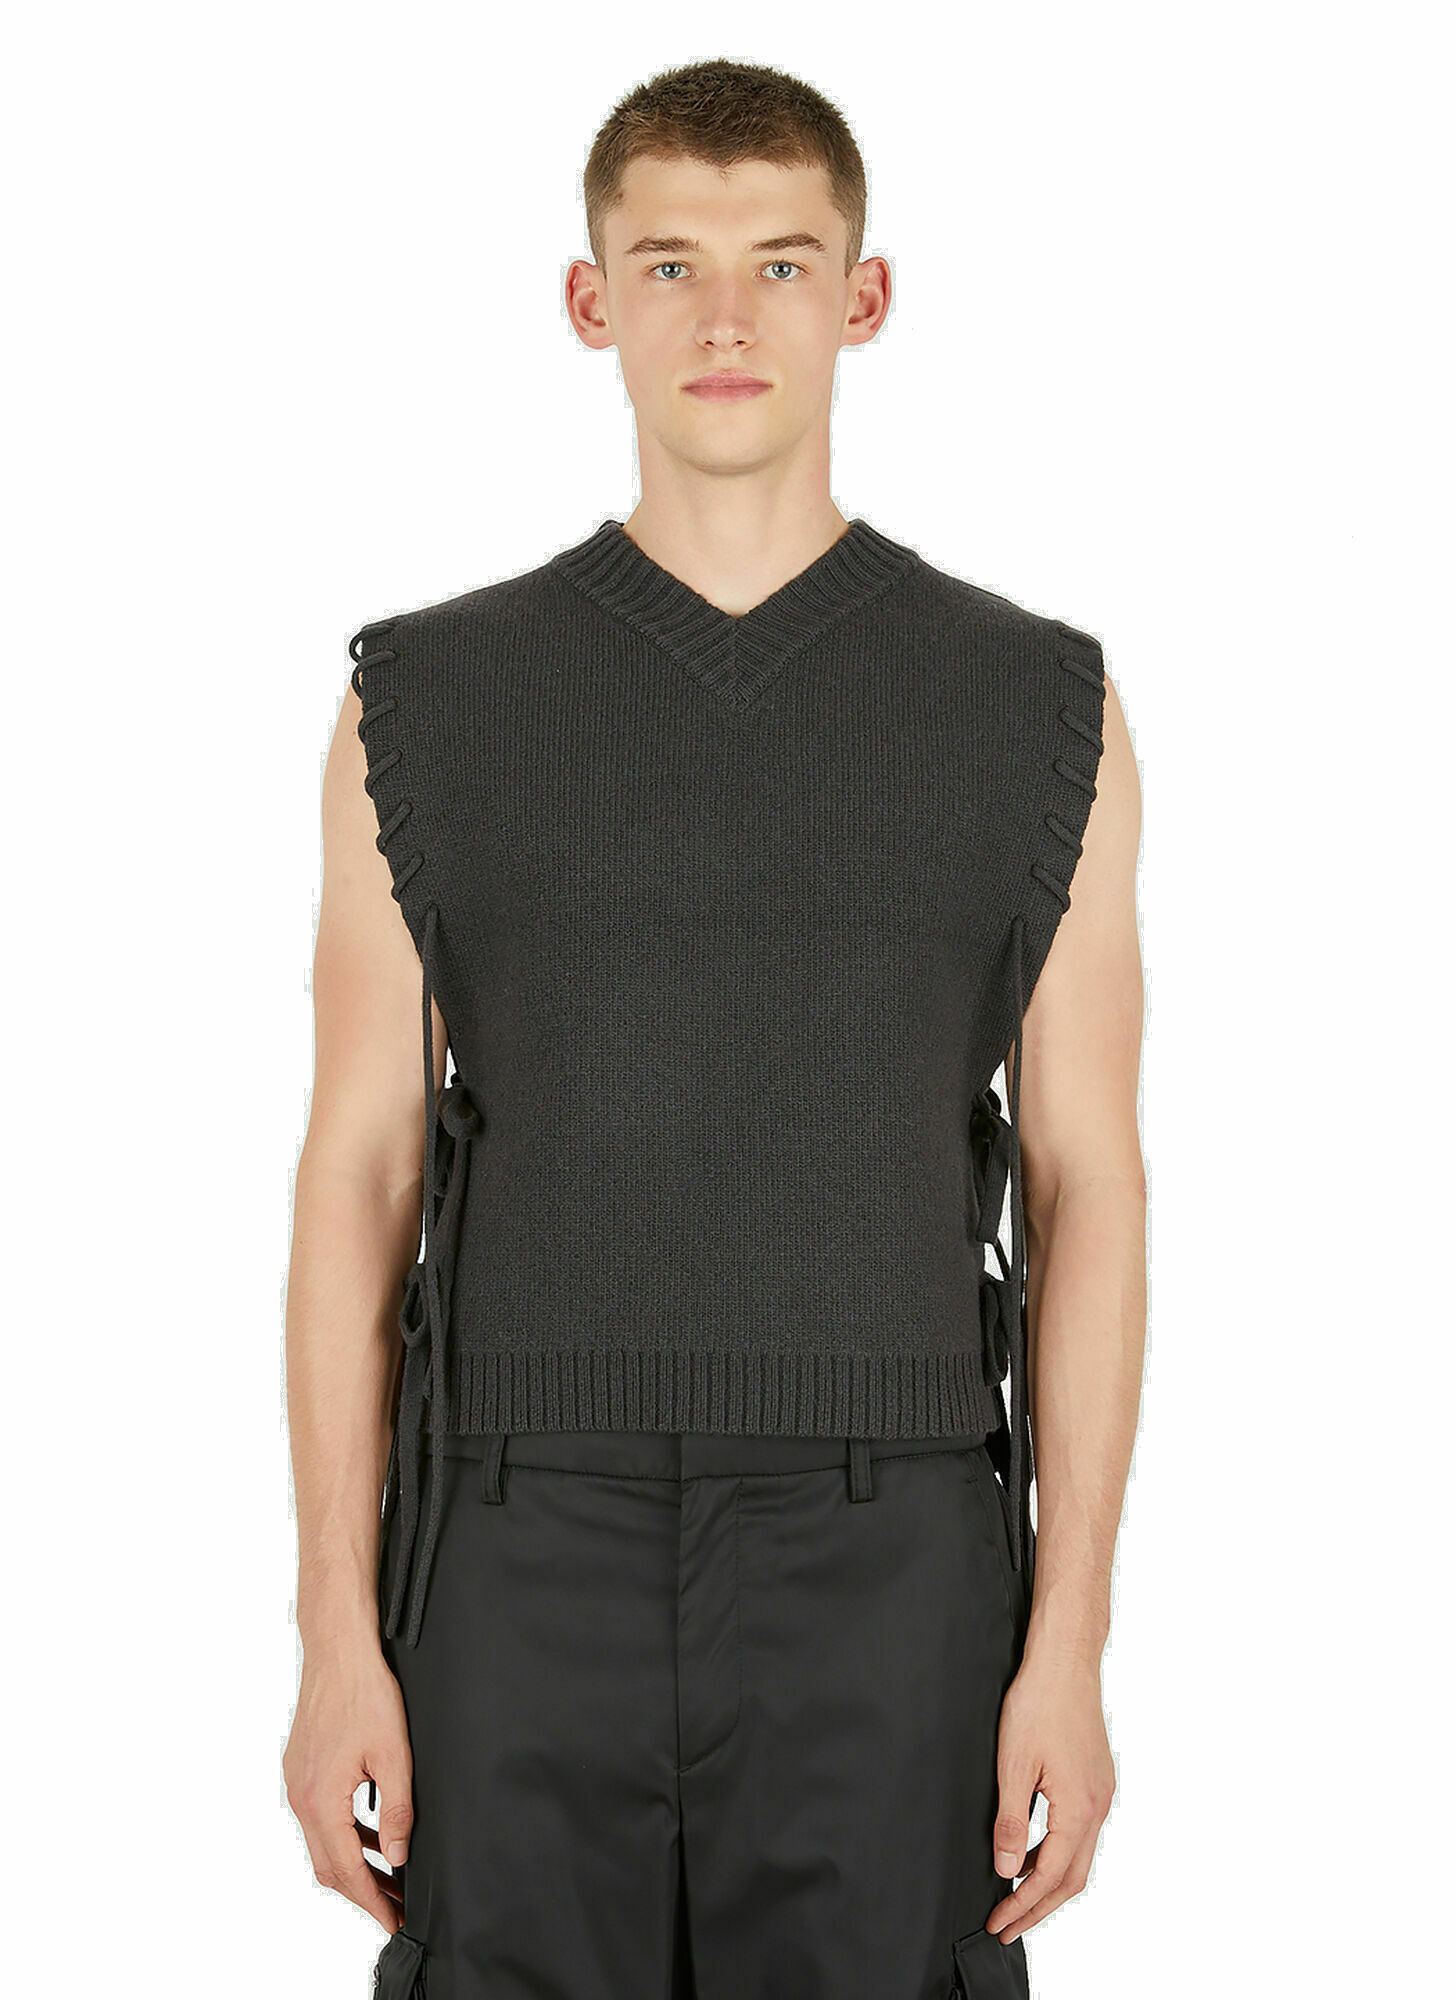 Photo: Laced Sleeveless Sweater in Black